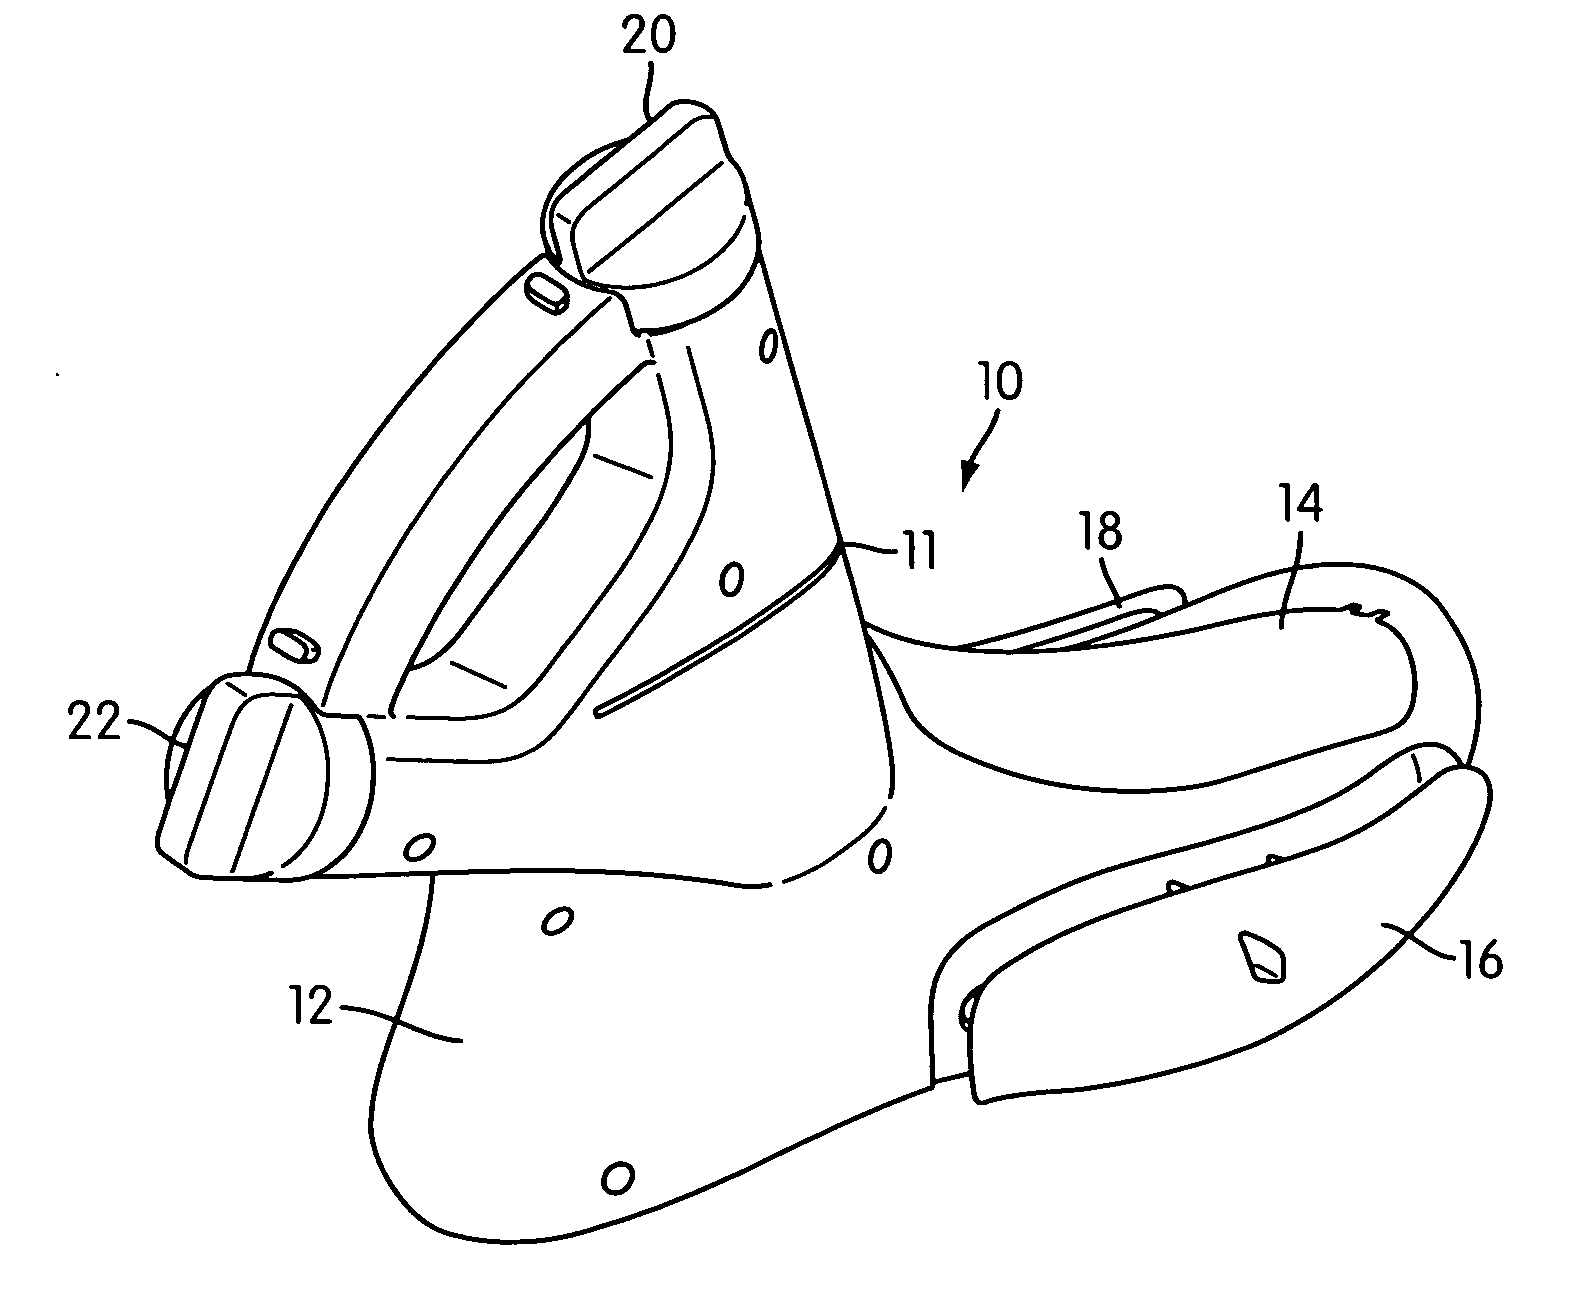 Custom fit system with adjustable last and method for custom fitting athletic shoes